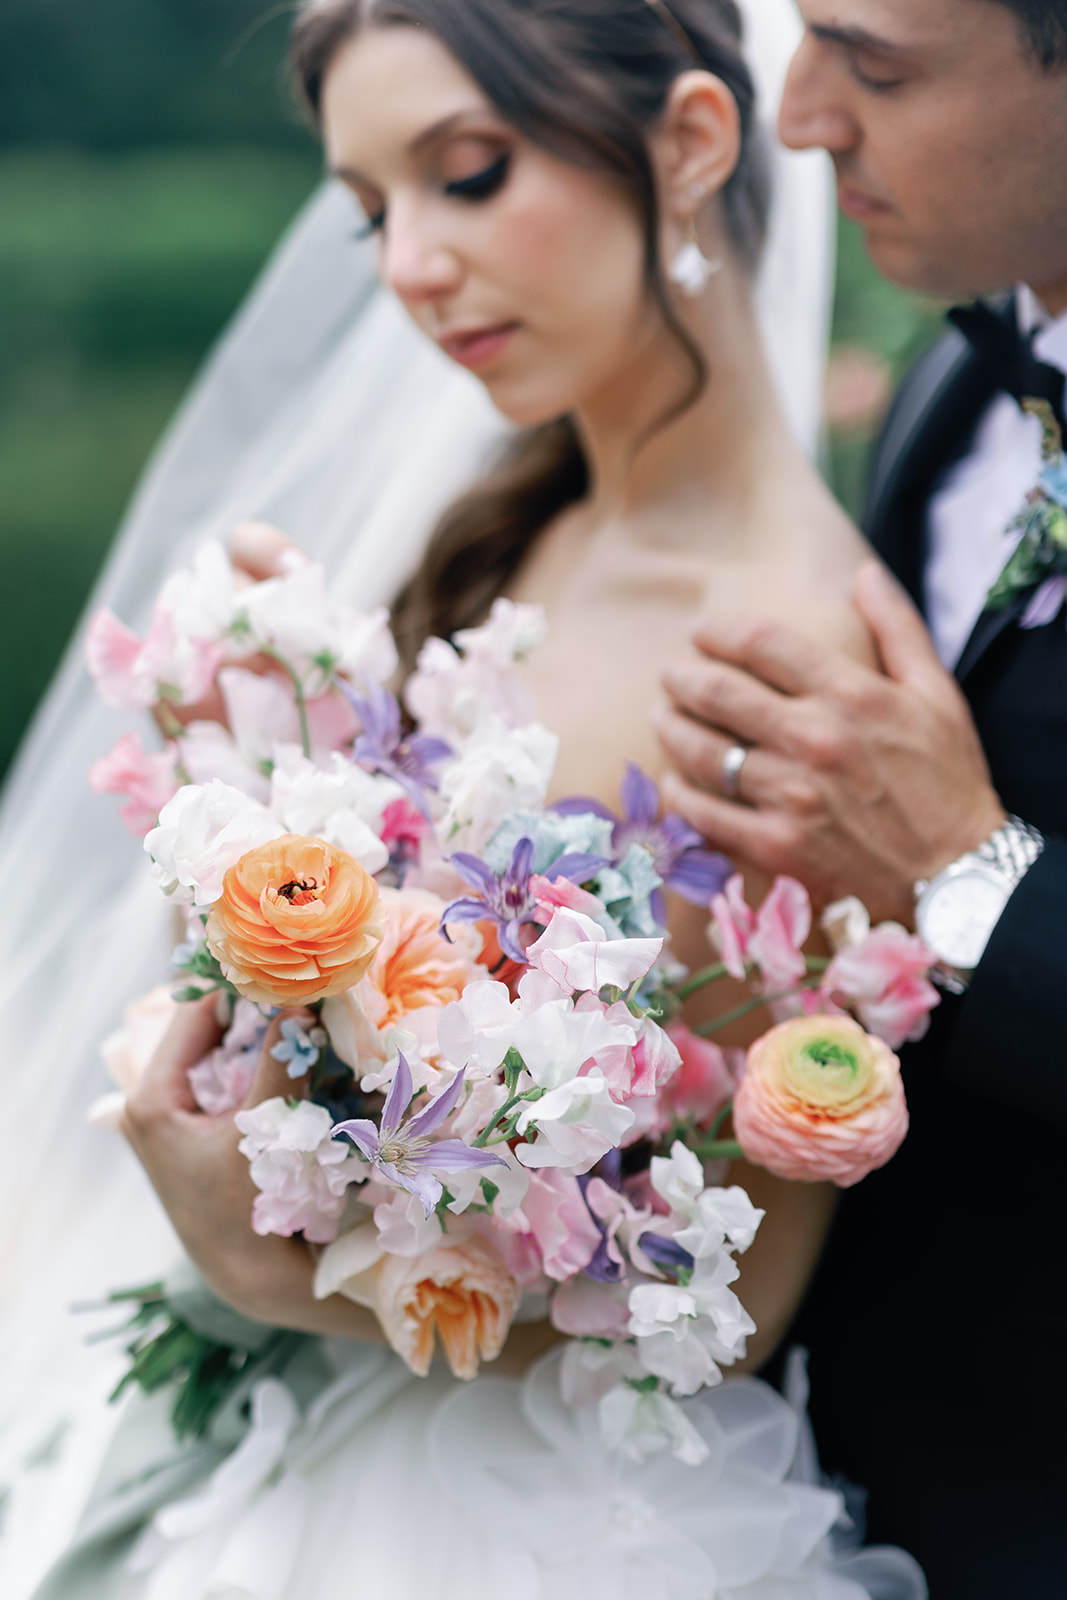 Newlyweds admire the bride's colorful bouquet at their Lake Valhalla Club wedding